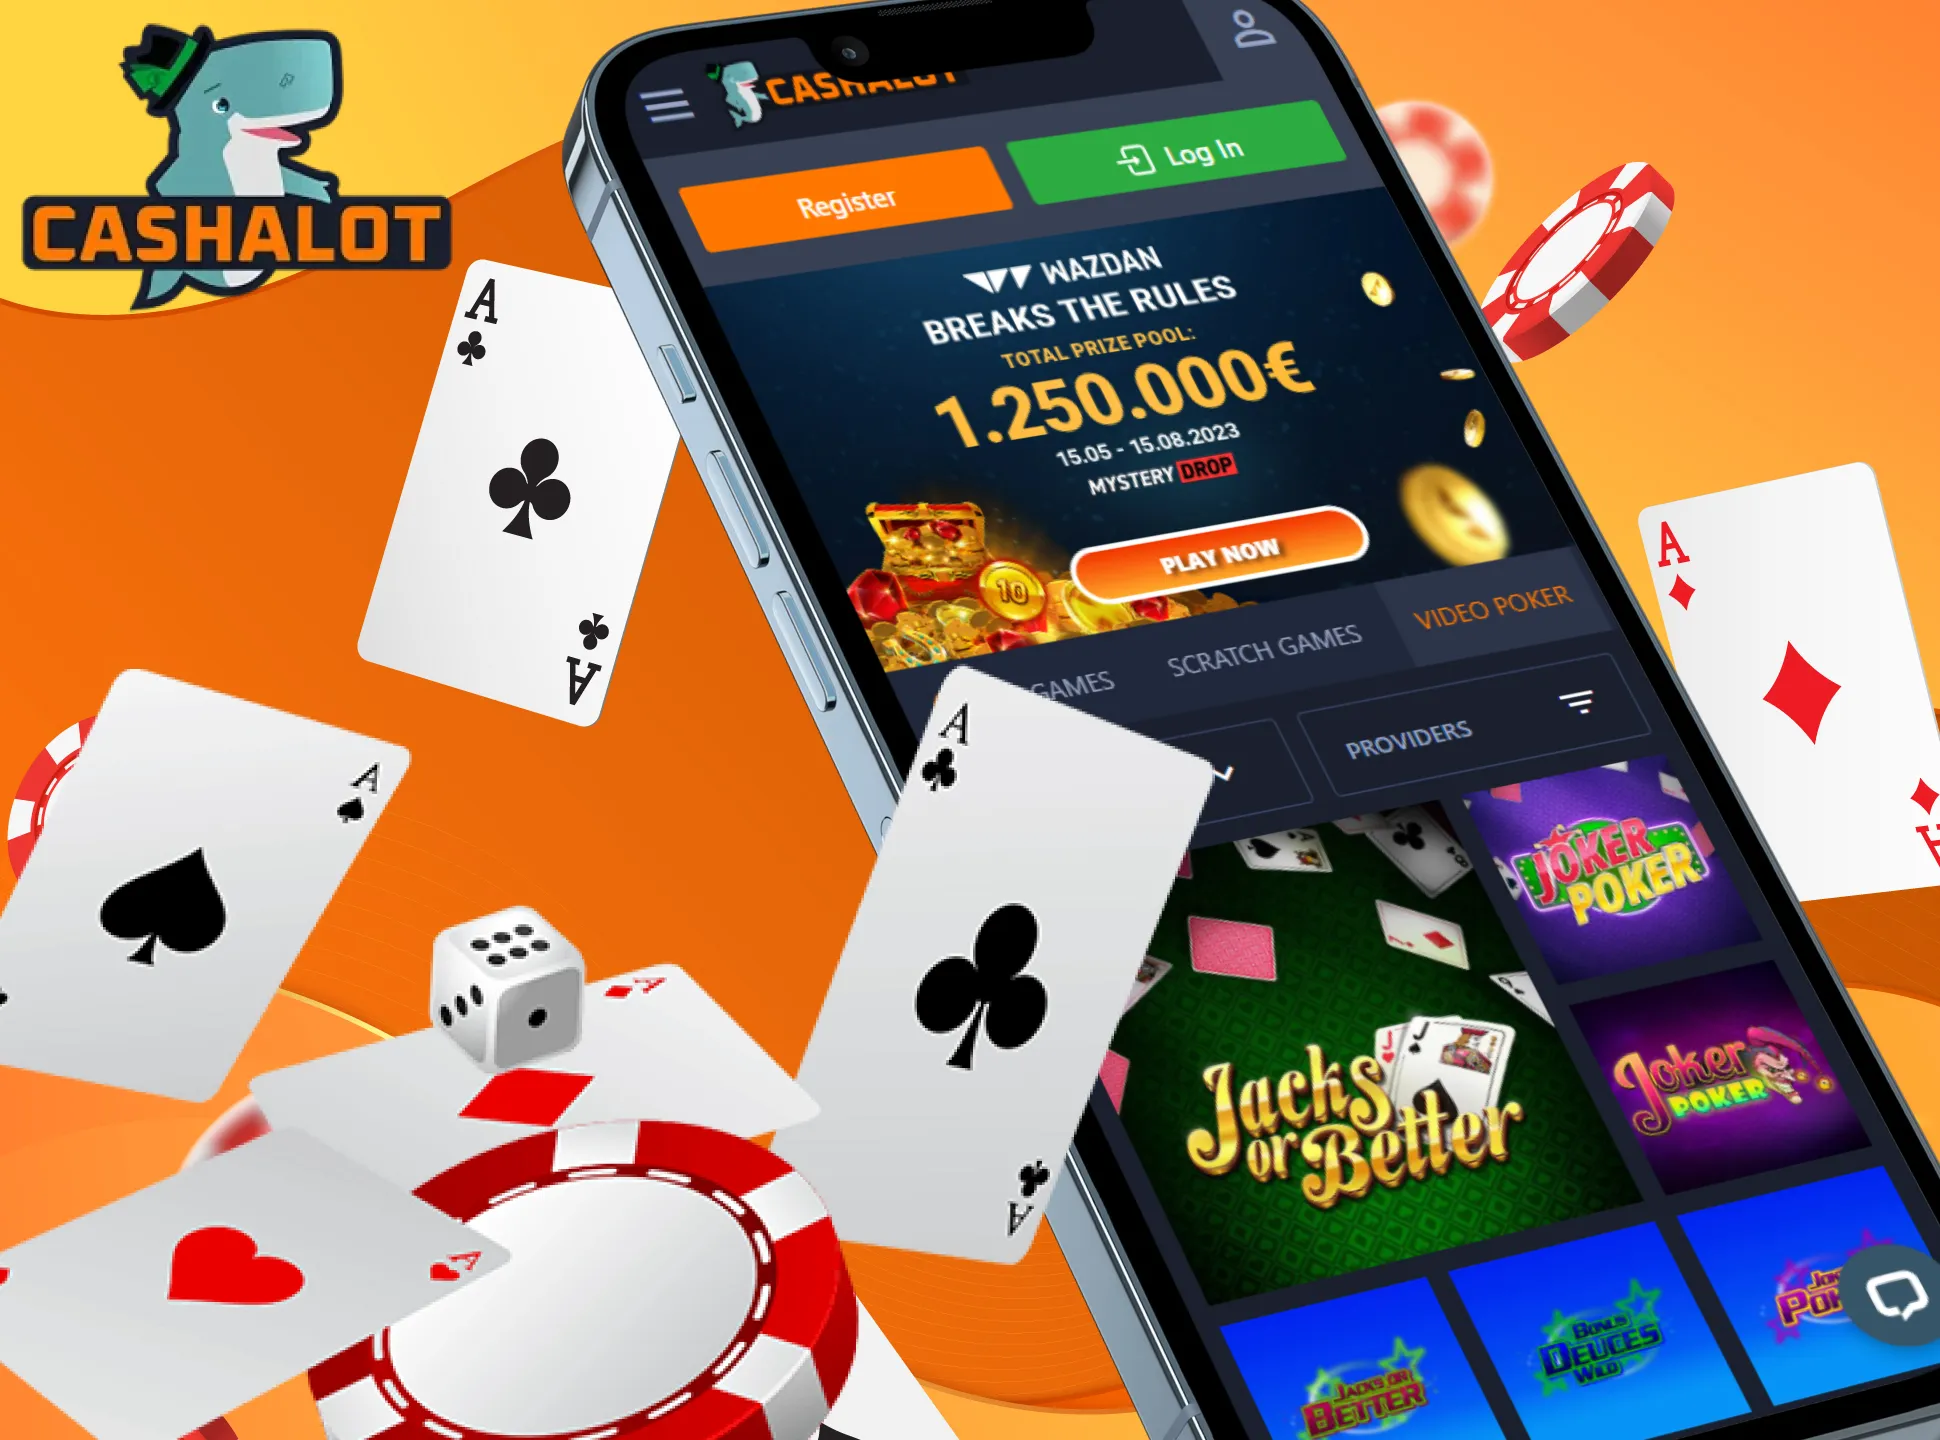 Play poker at the Cashalot casino with real people.